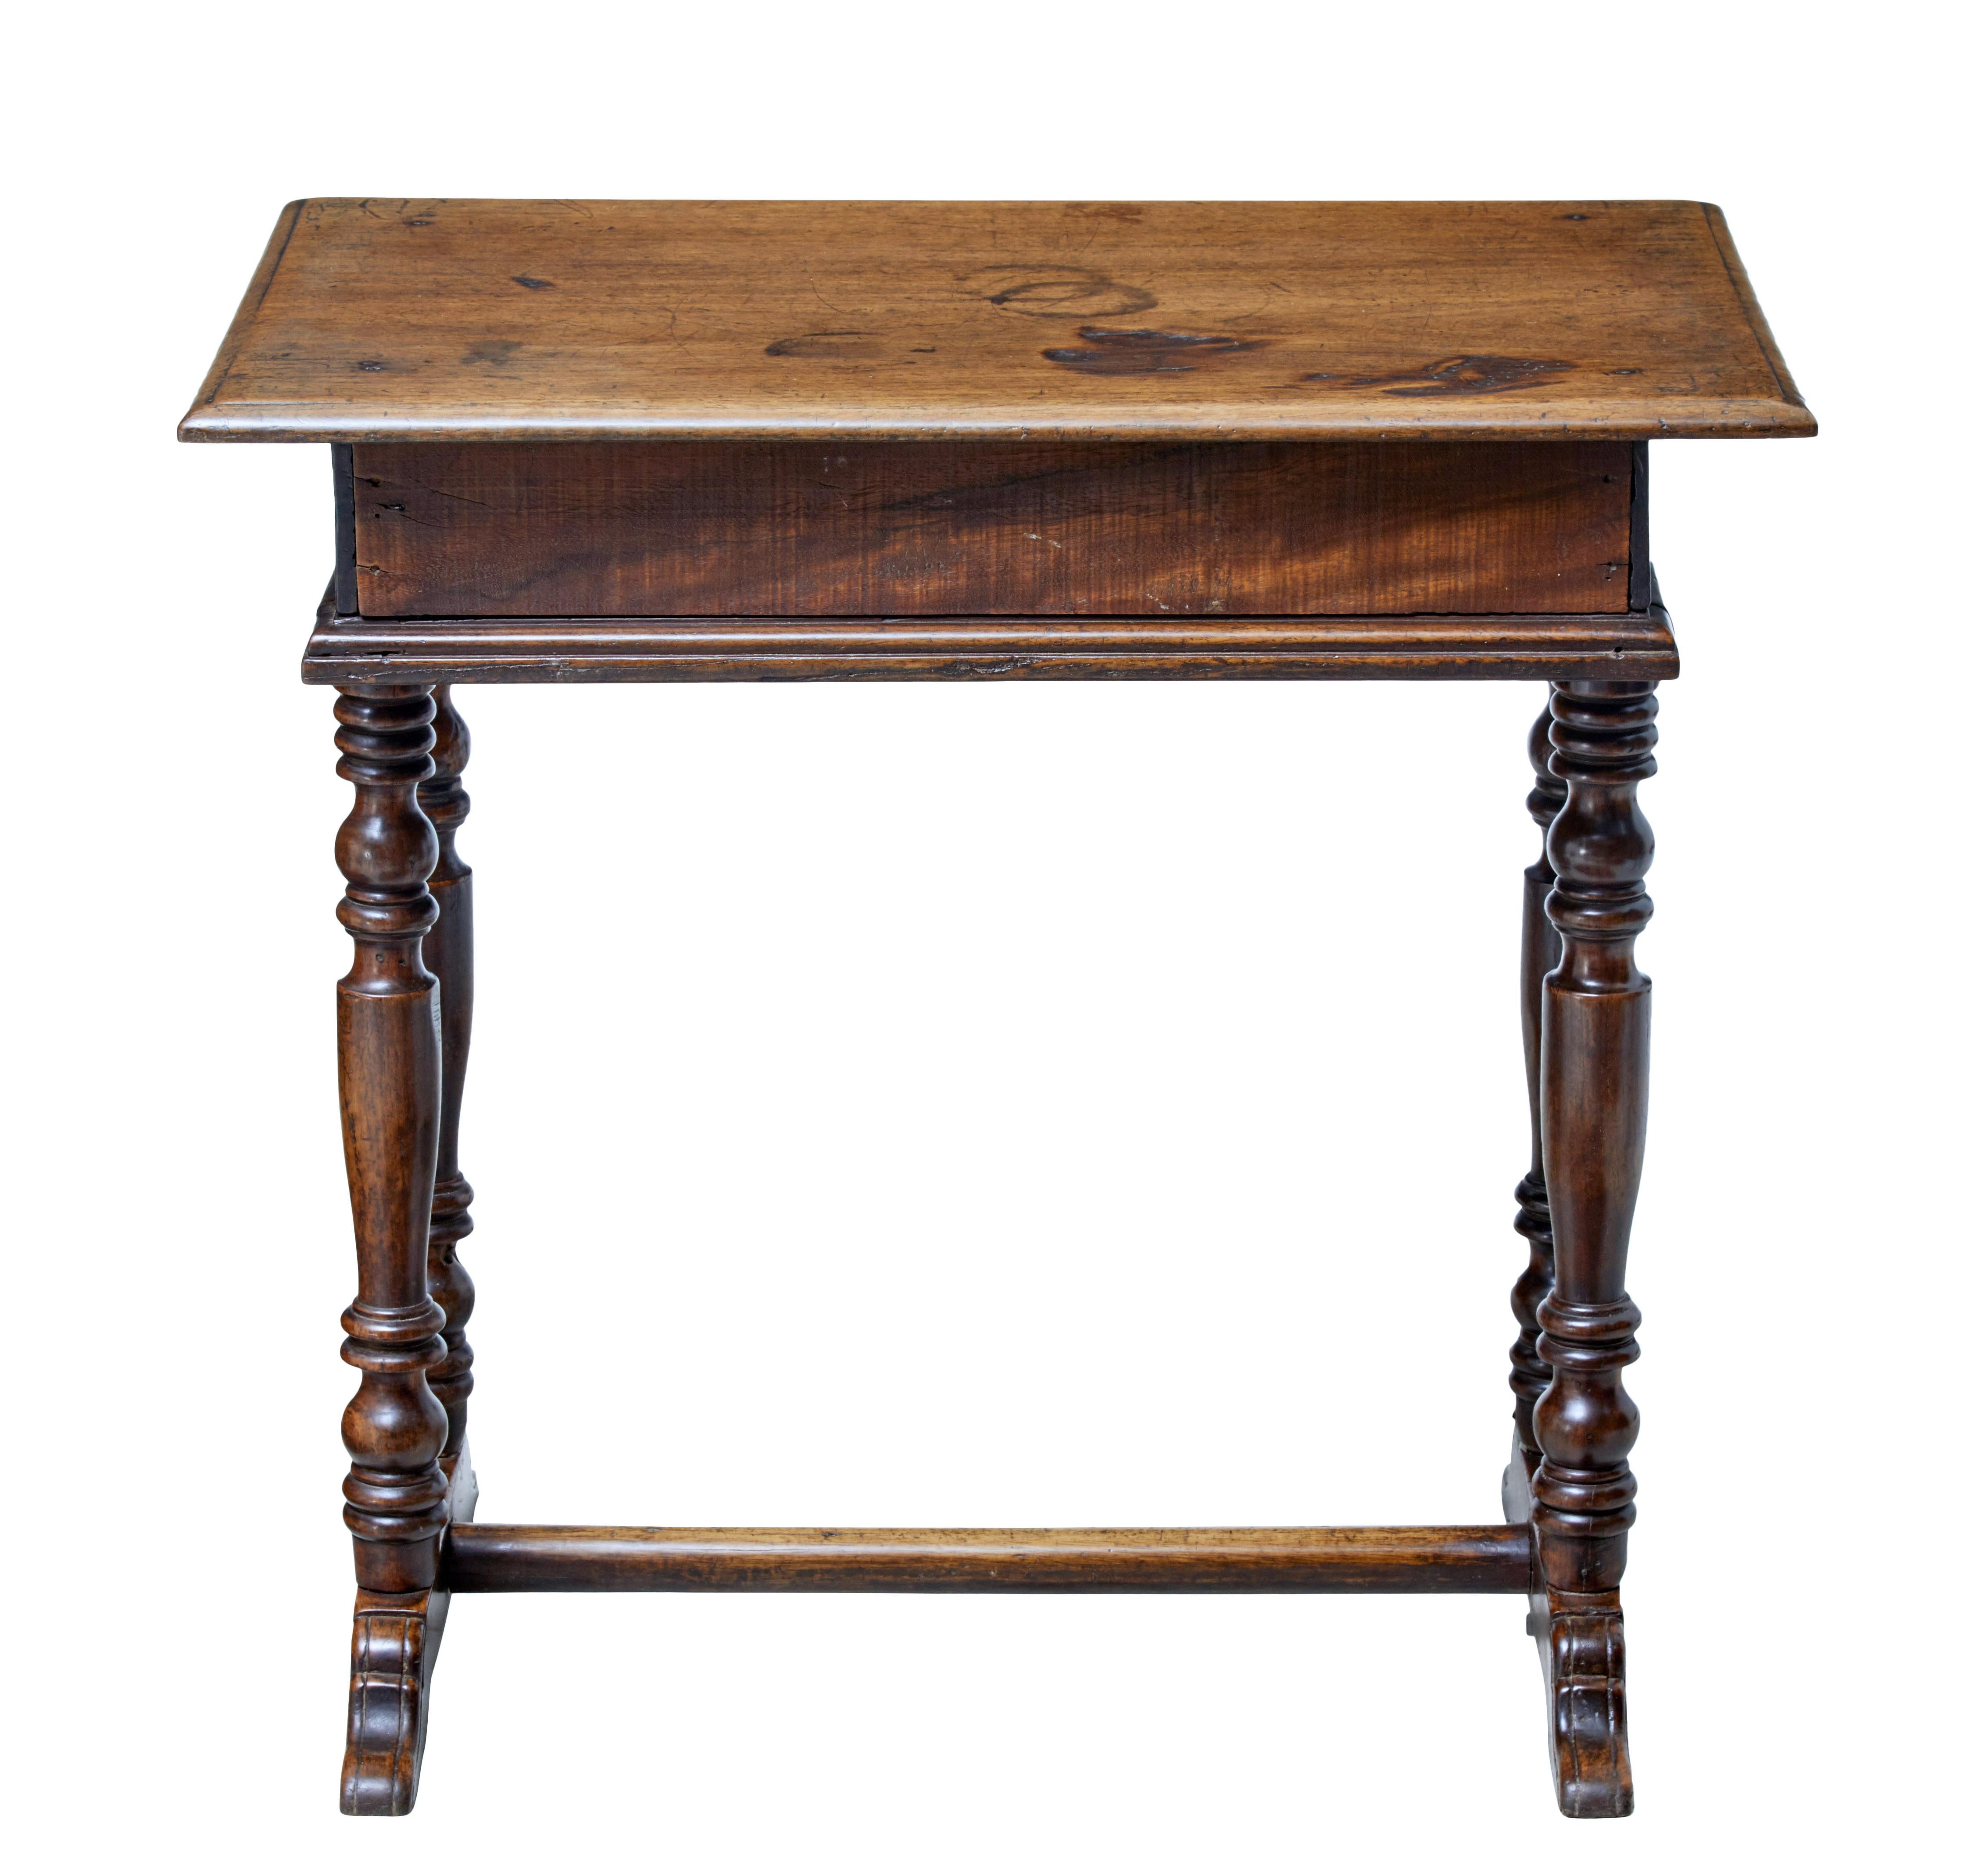 18th century side table